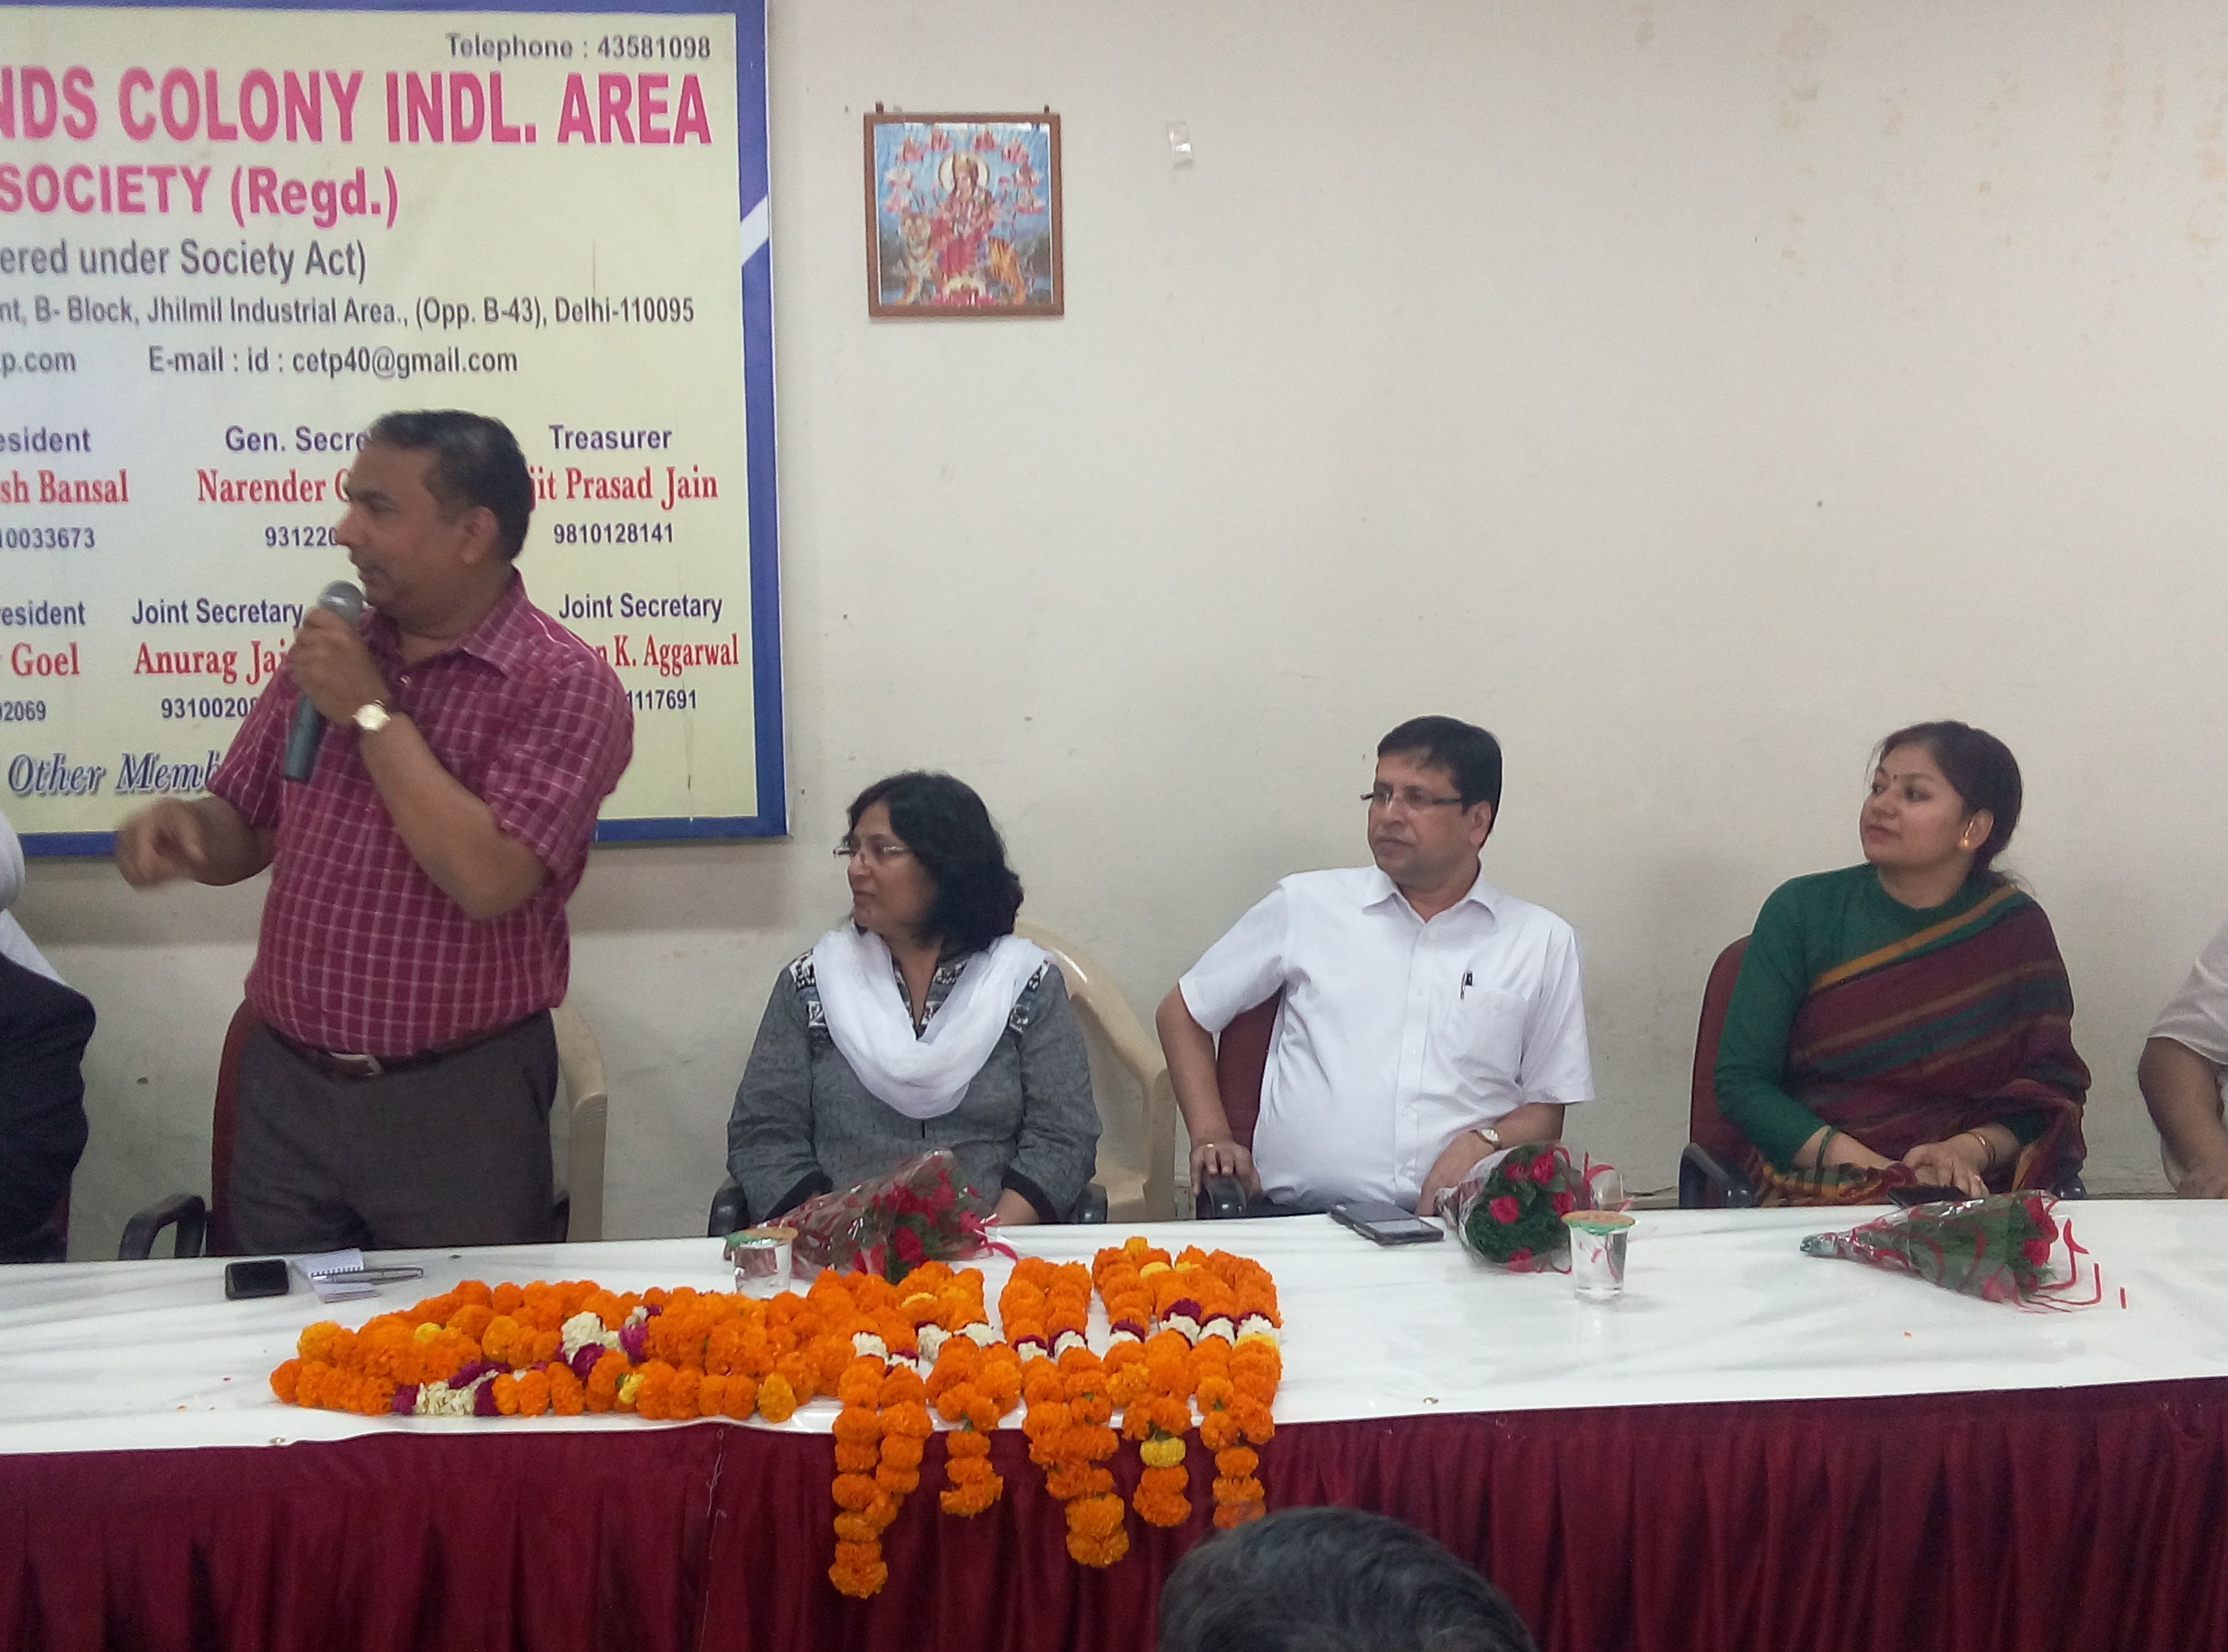 DLSA EAST in association with Delhi RWA Federation organized awareness programme for the workers of Jhilmil industrial area of the district on the occasion of  International Labour Day on 2nd May. Ld. Chairman Sh. Talwant Singh, District & Sessions Judge East, Mrs. Illa Rawat, Ld. POLC, Sh. Rajeev Bansal, Ld. POLC and Sh. Abhishek Singh, DM (Shahdara), Sh. AK Singla, DCP, ADM, SDM, SHO and other high dignitaries answered the queries of the laborers.